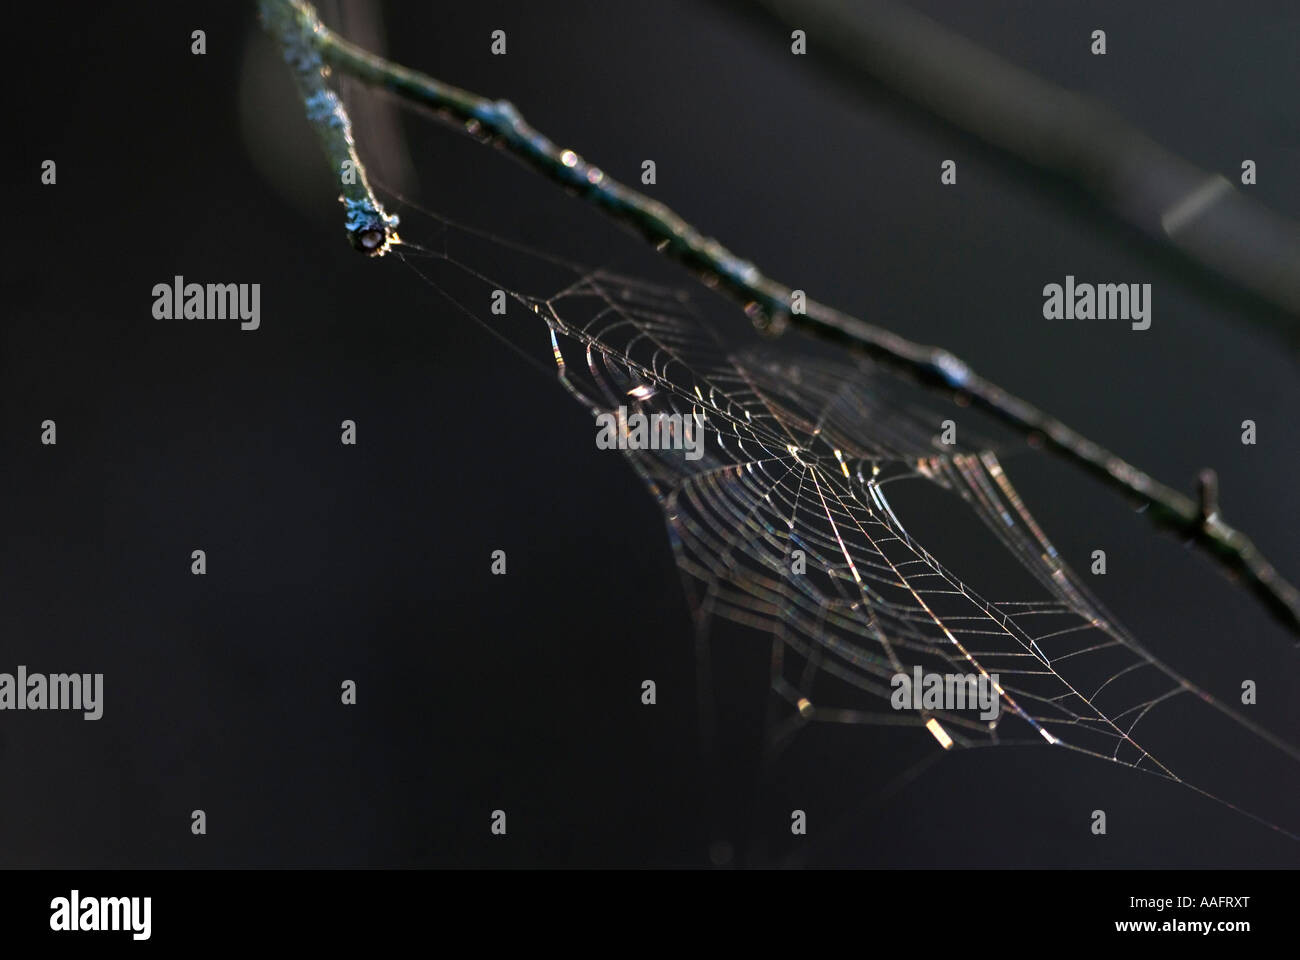 Spiders web in forest Banque D'Images